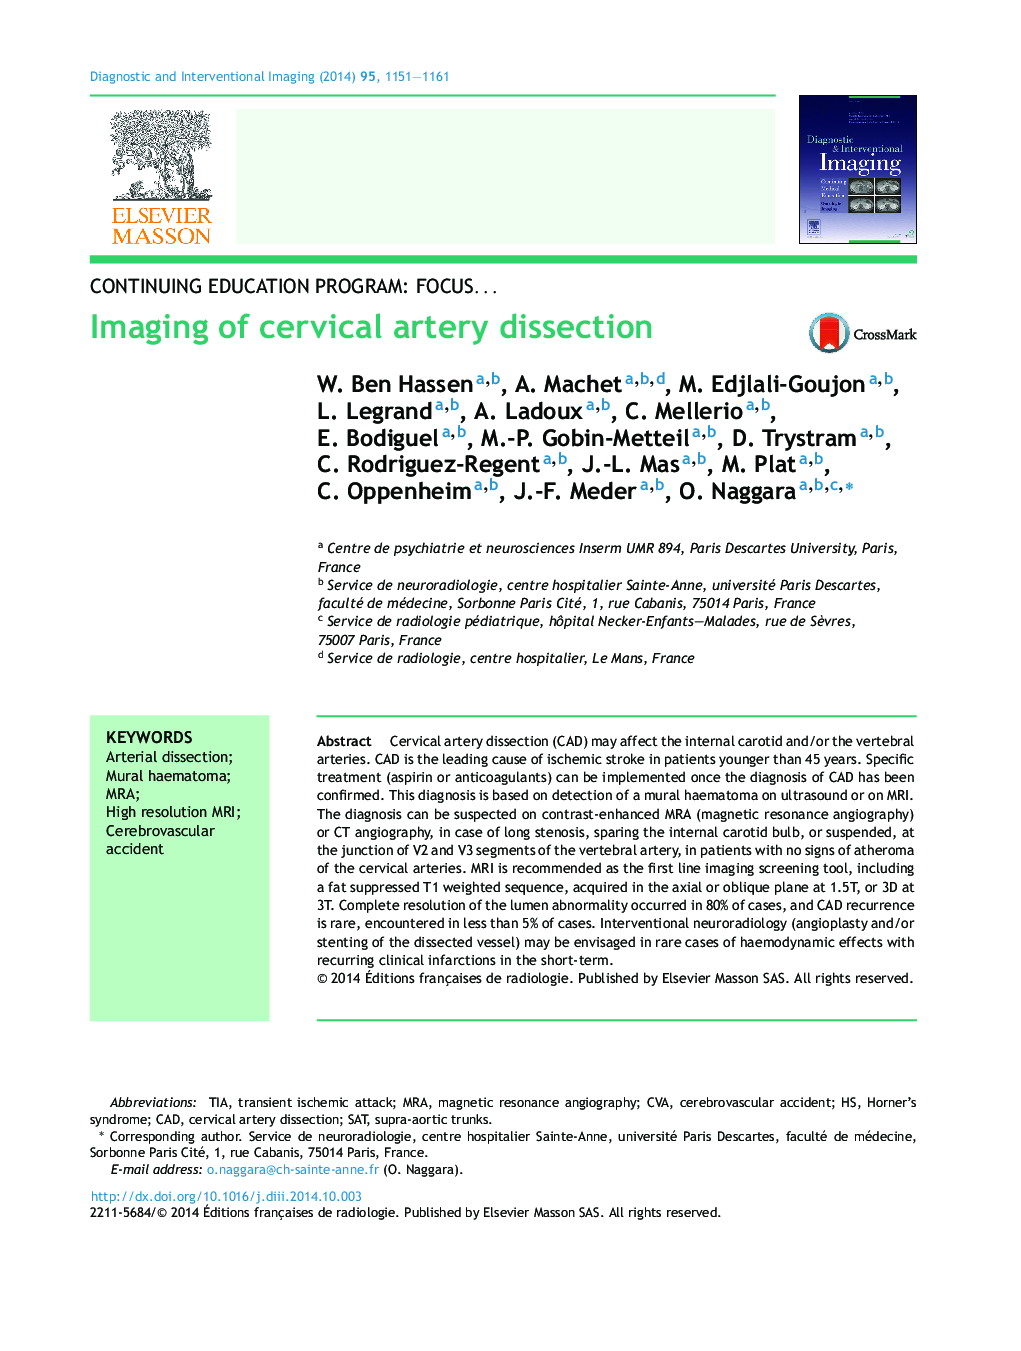 Imaging of cervical artery dissection